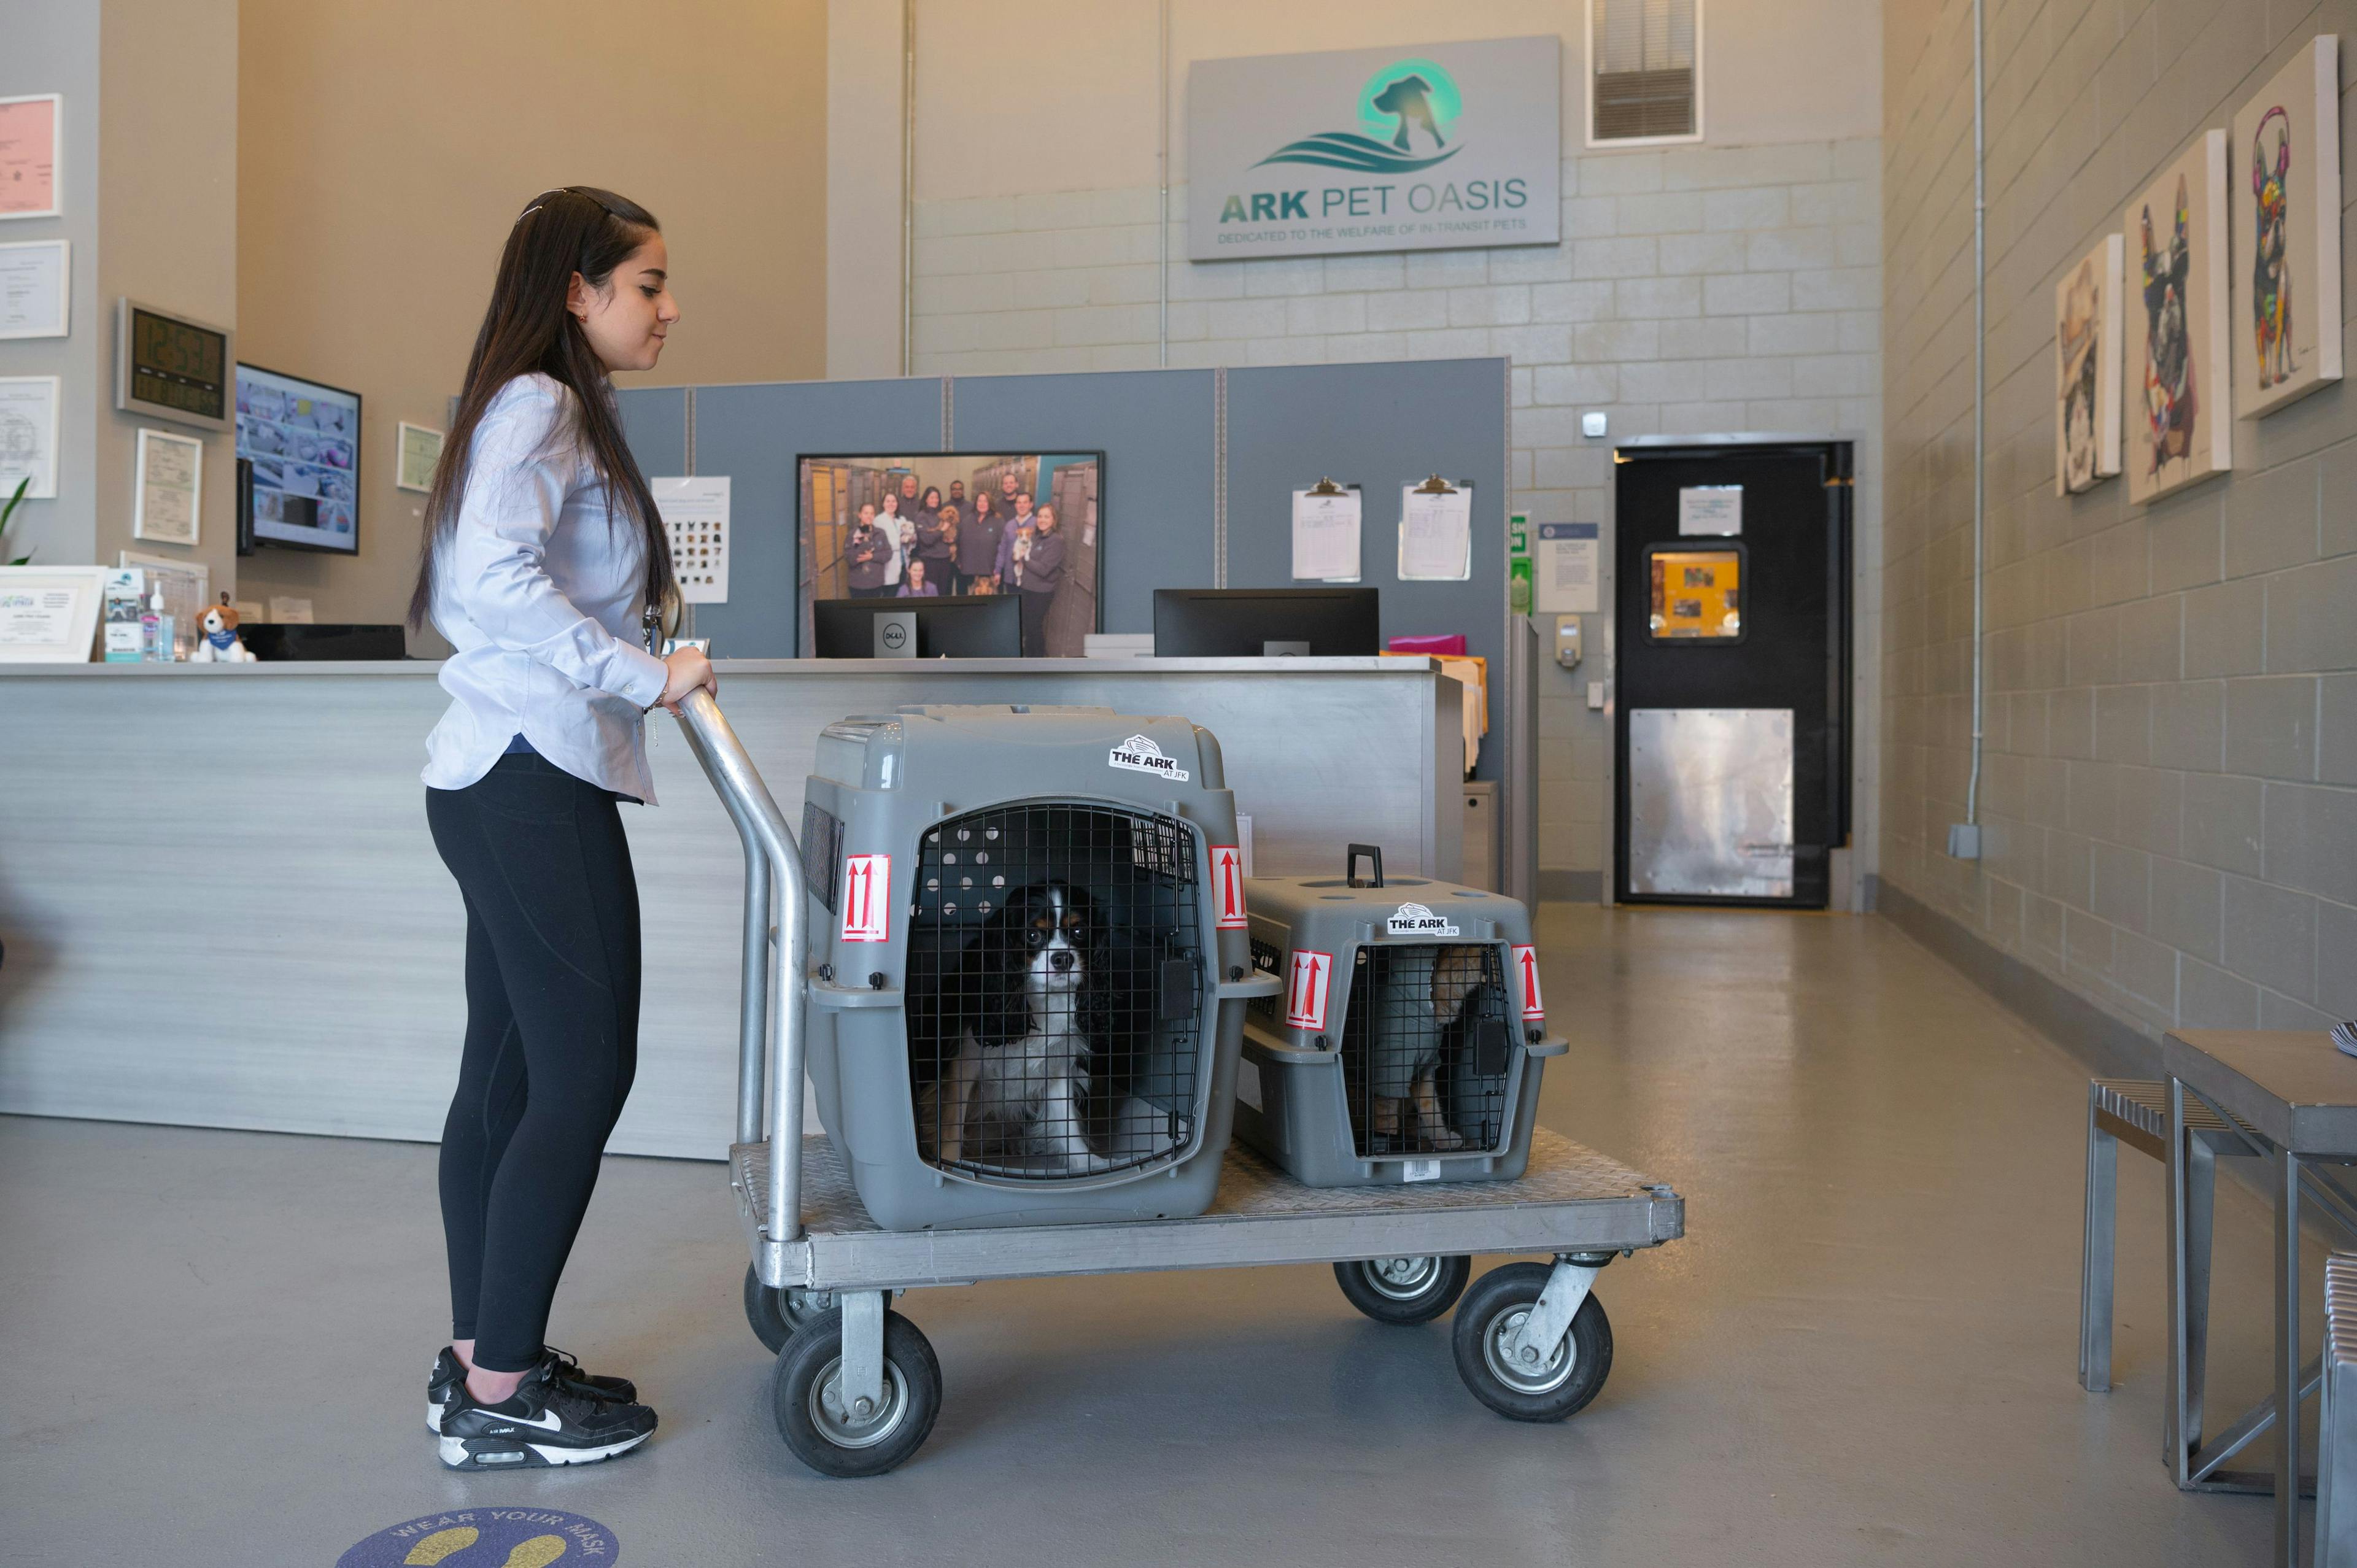 Ark at JFK teams up with Zoundz to ease pet anxiety during travel